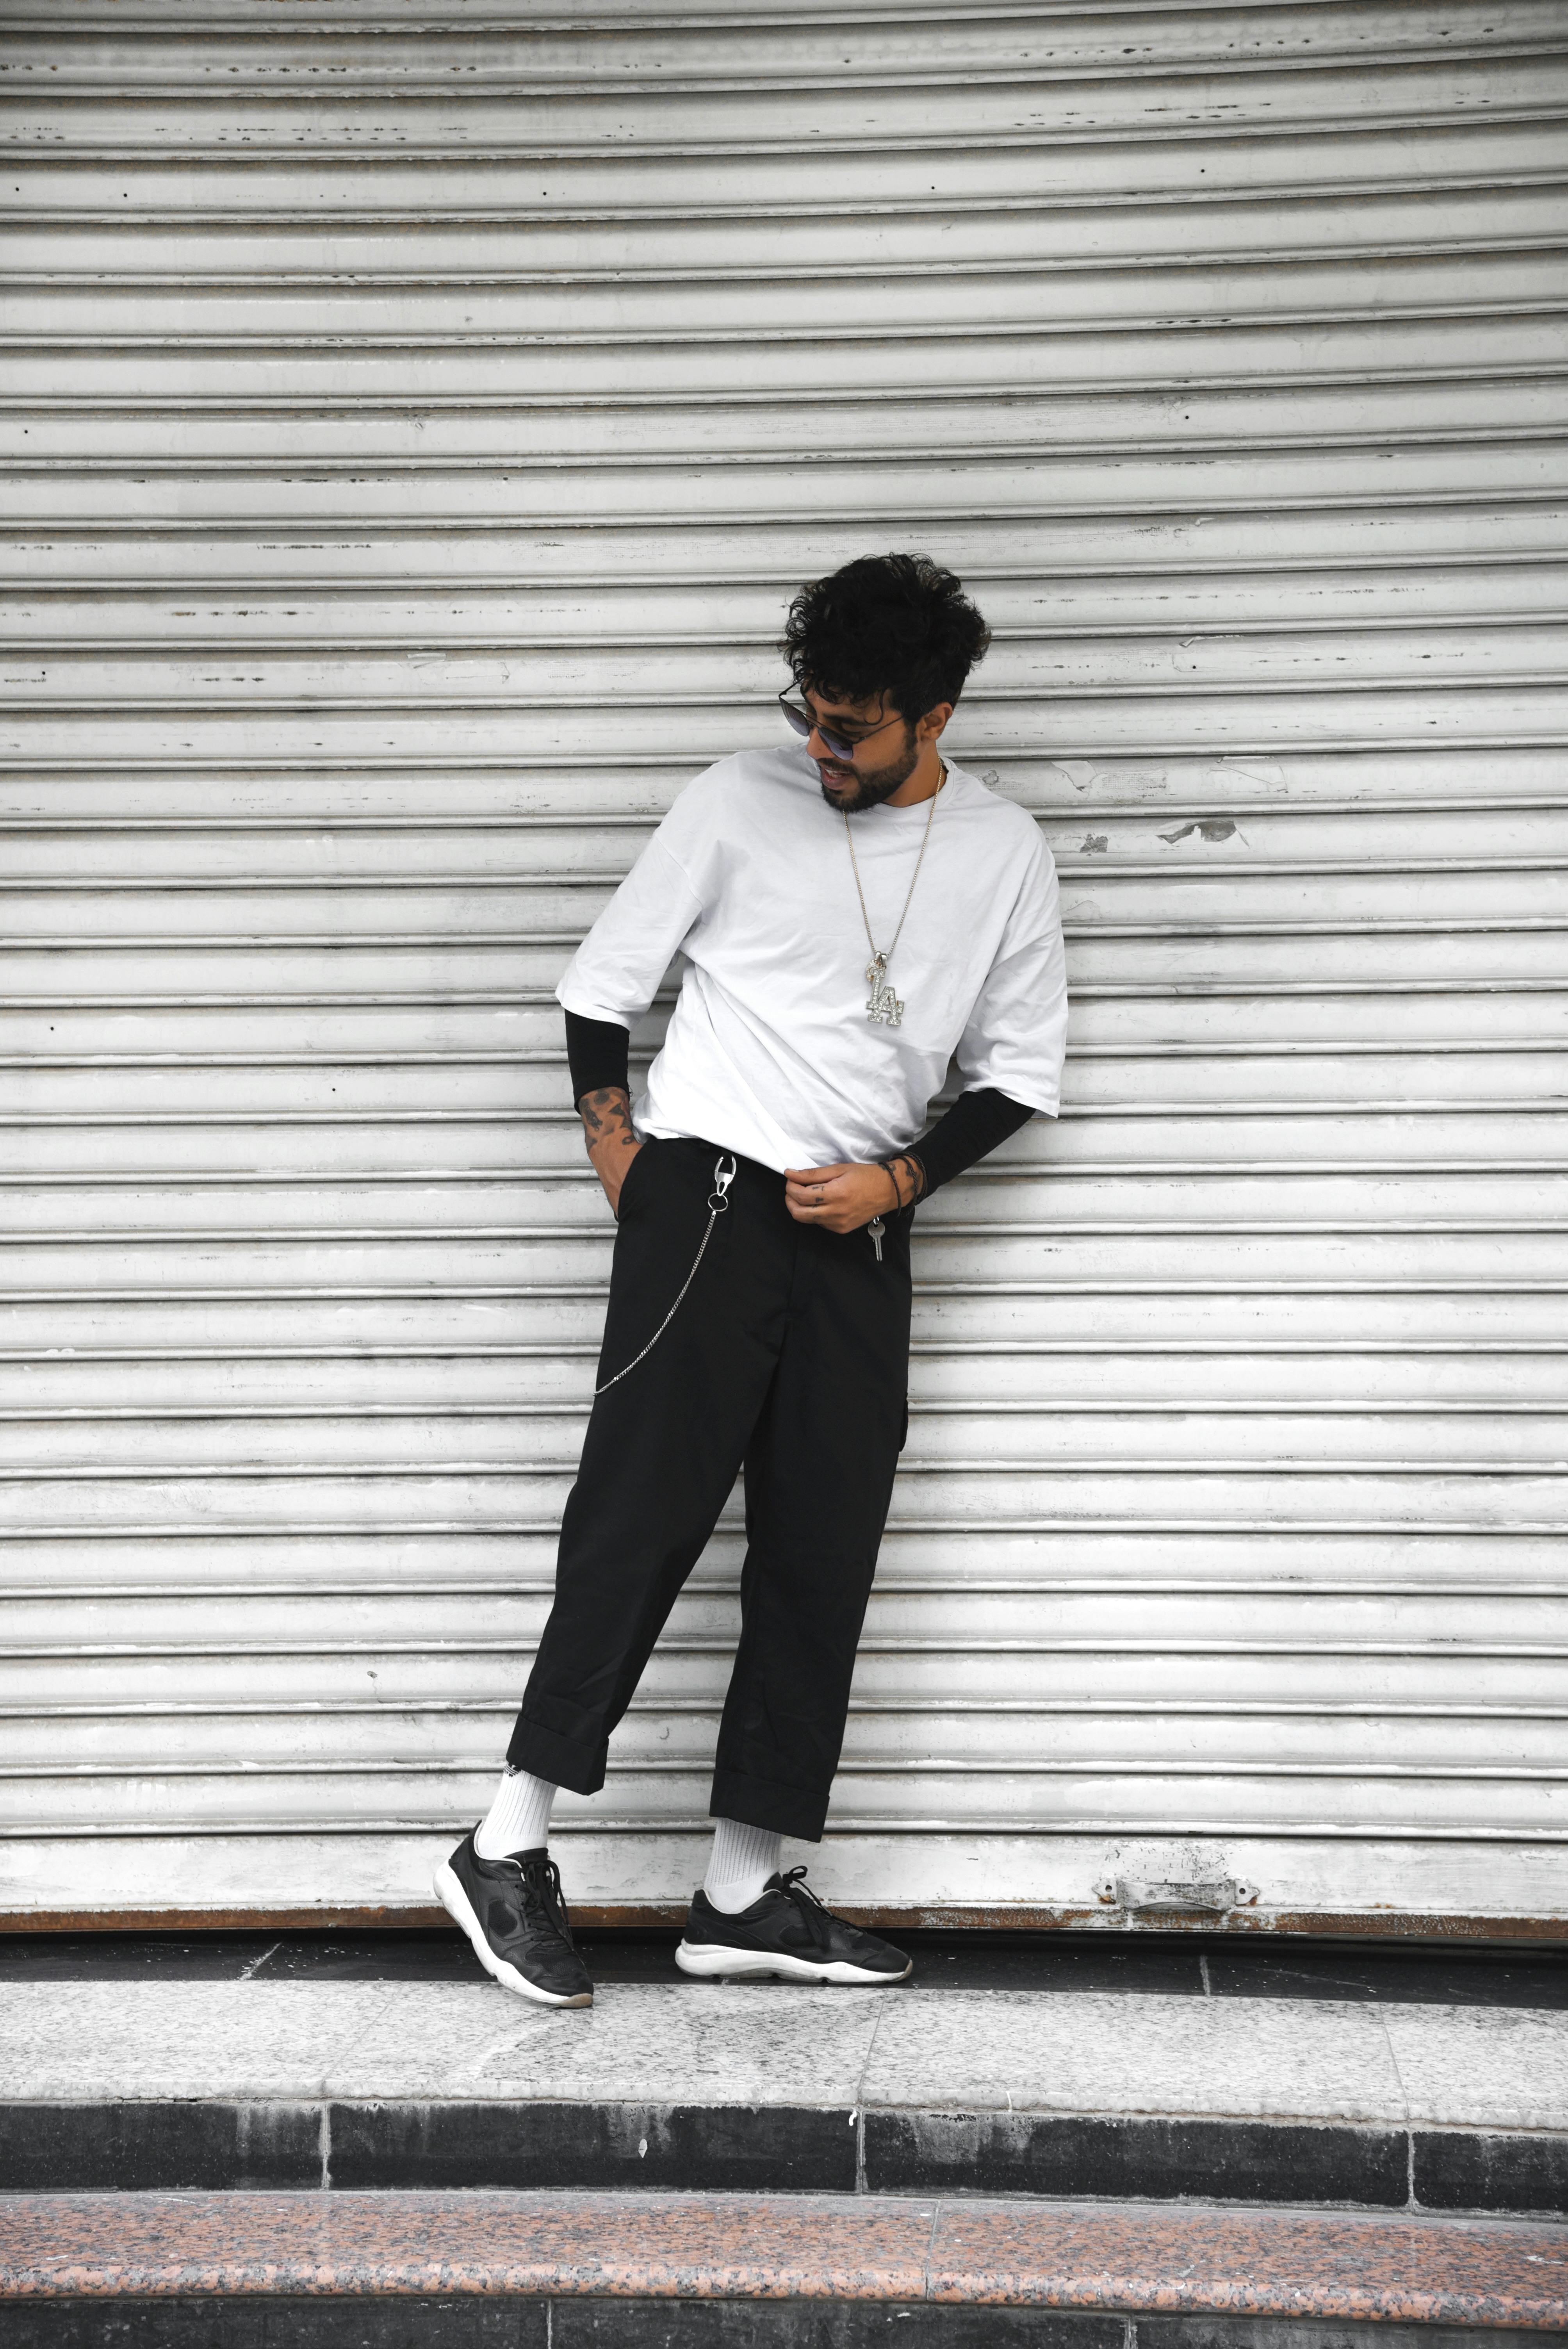 Can I wear white shirt, black trousers and brown shoes? - Quora